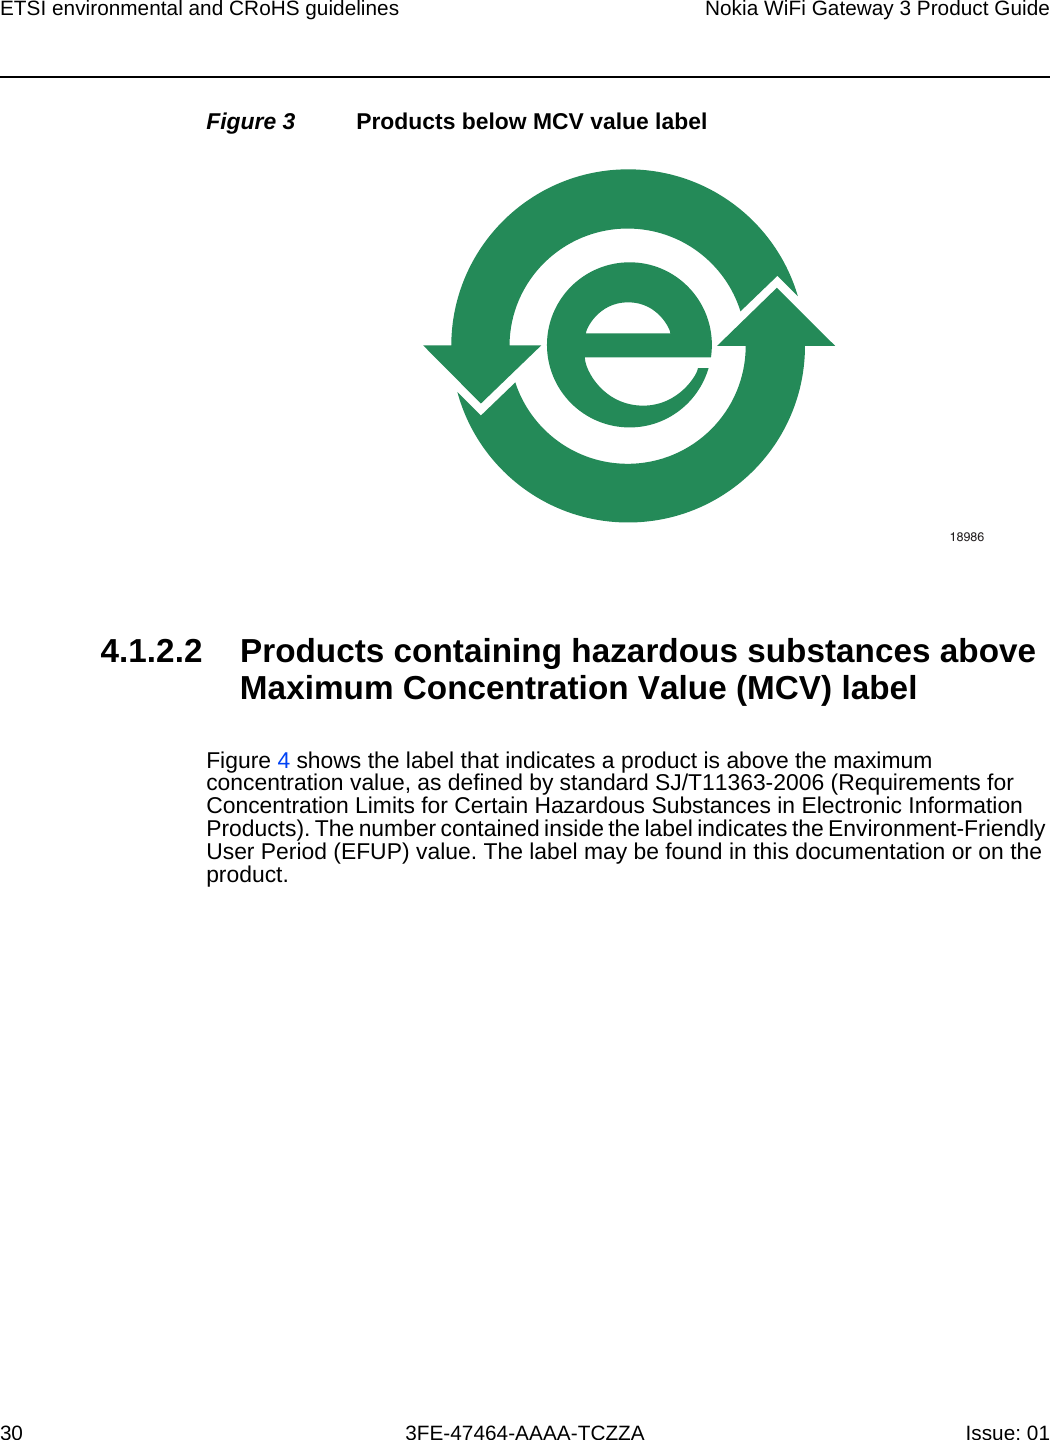 ETSI environmental and CRoHS guidelines30Nokia WiFi Gateway 3 Product Guide3FE-47464-AAAA-TCZZA Issue: 01 Figure 3 Products below MCV value label4.1.2.2 Products containing hazardous substances above Maximum Concentration Value (MCV) labelFigure 4 shows the label that indicates a product is above the maximum concentration value, as defined by standard SJ/T11363-2006 (Requirements for Concentration Limits for Certain Hazardous Substances in Electronic Information Products). The number contained inside the label indicates the Environment-Friendly User Period (EFUP) value. The label may be found in this documentation or on the product.18986